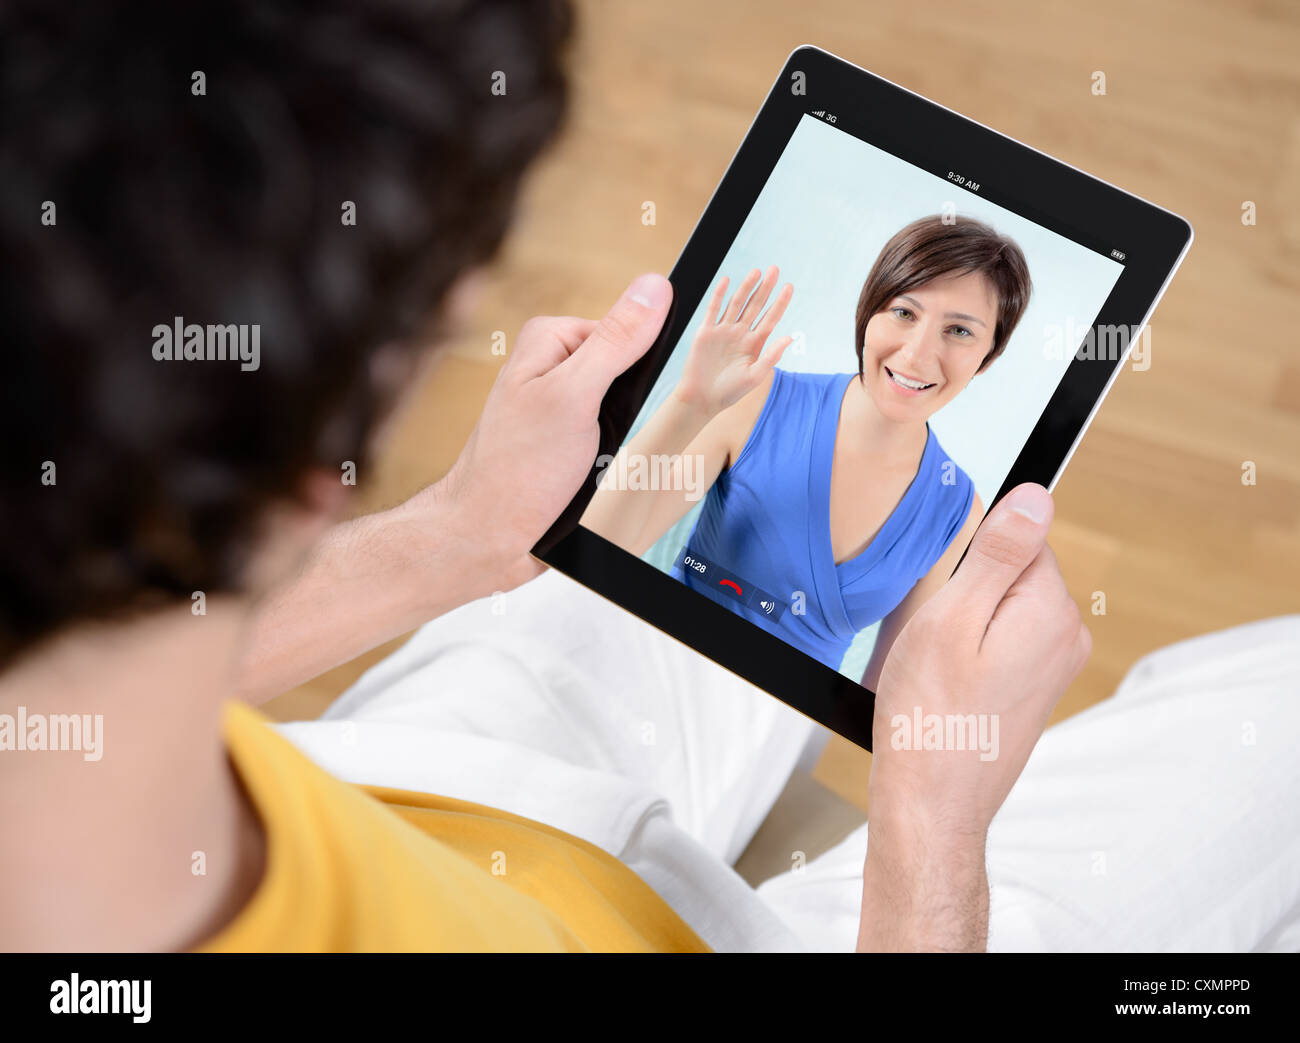 Man and woman communicate through video chat on modern digital tablet. Stock Photo